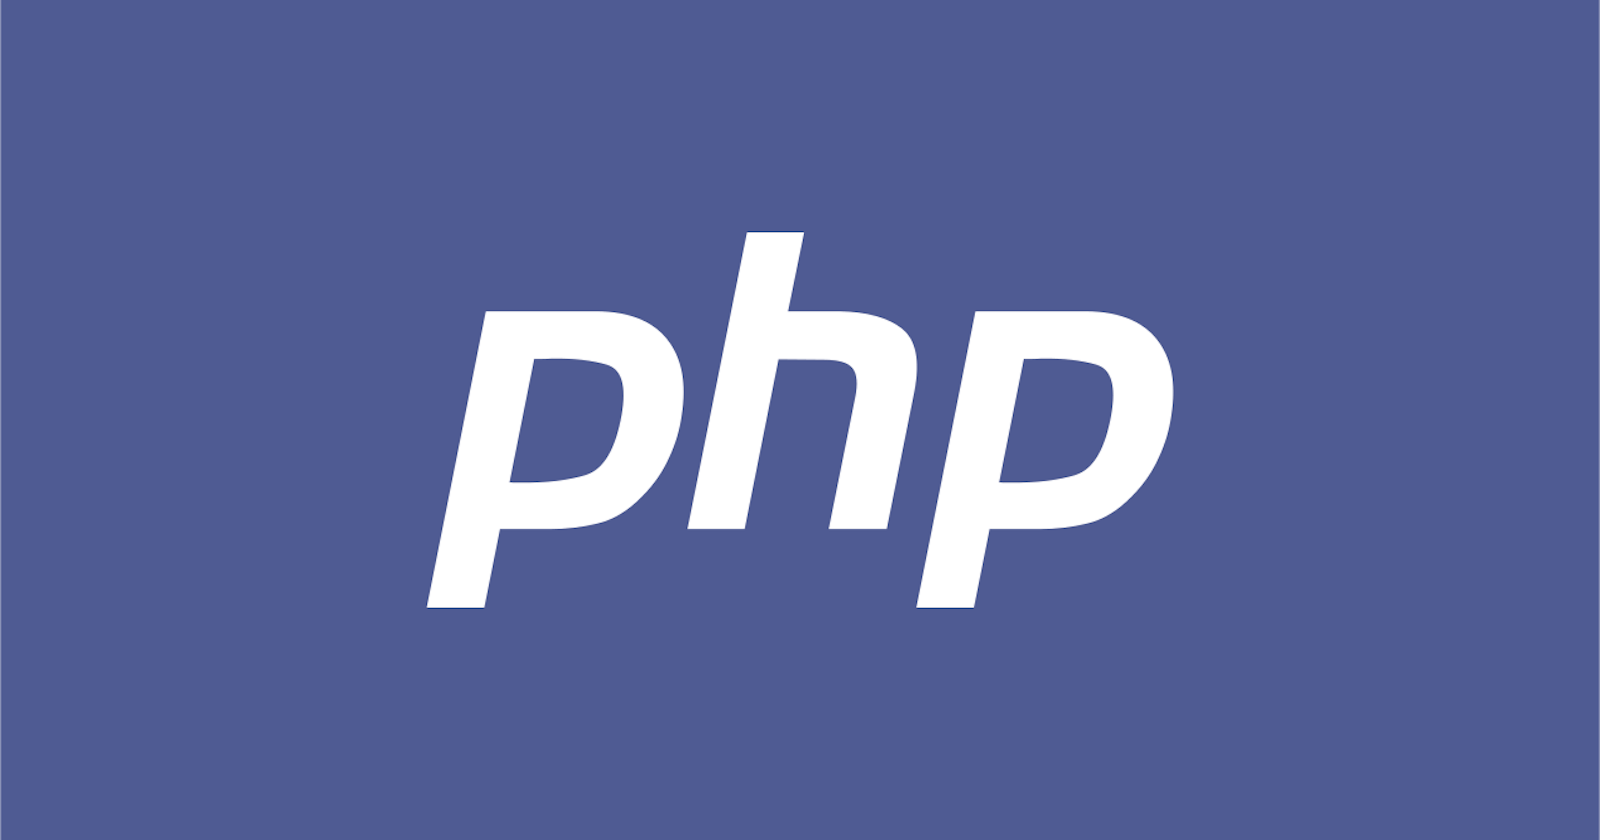 How does PHP compare to other programming languages in terms of performance and speed?